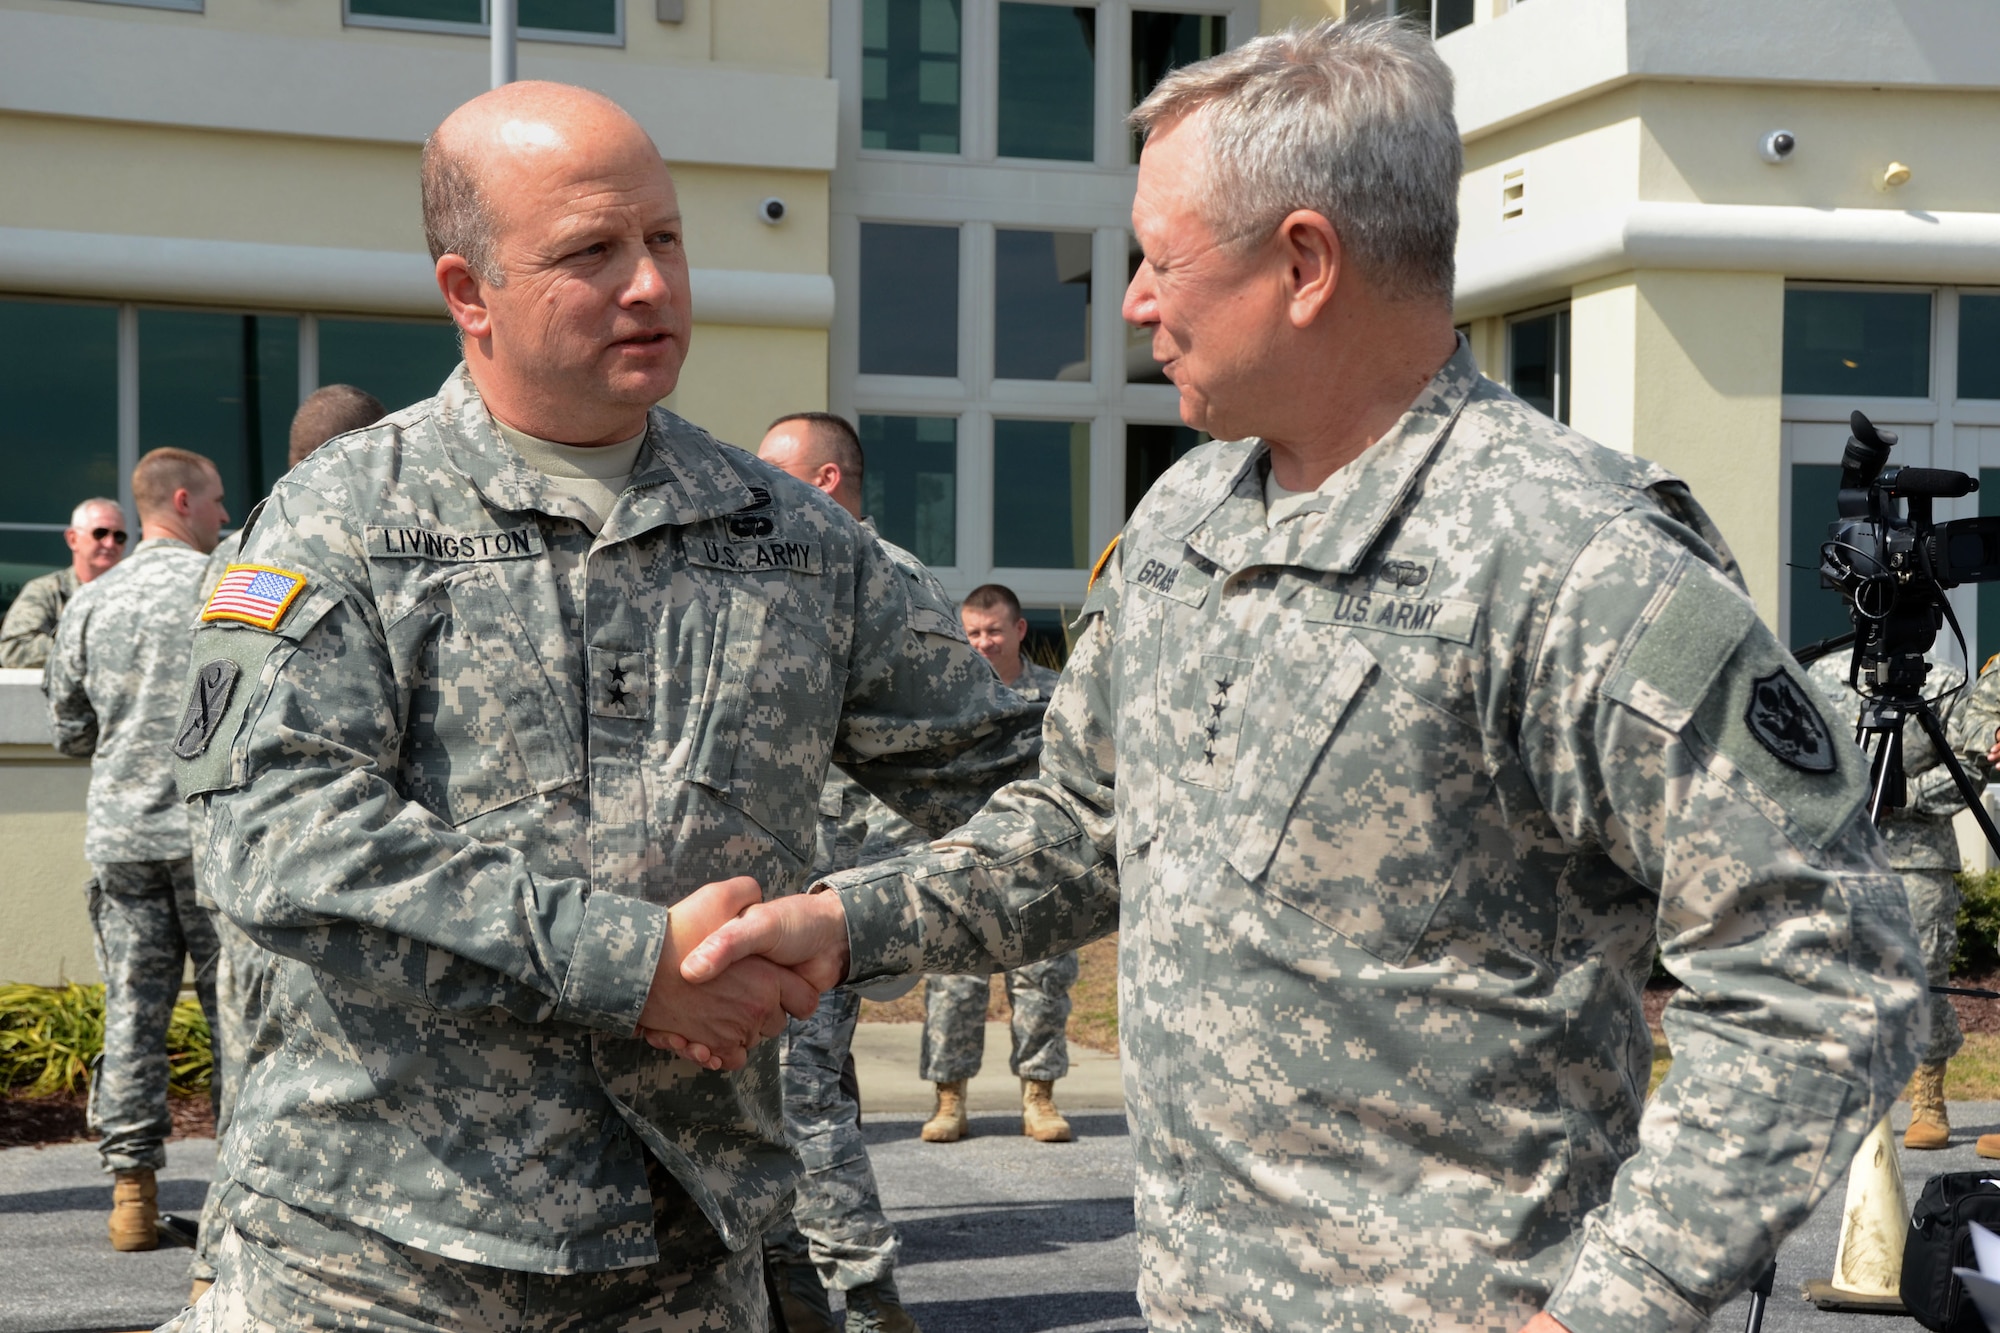 U.S. Army Maj. Gen. Robert E. Livingston Jr. (left), the Adjutant General for the state of South Carolina, shakes hands with Gen. Frank J. Grass, Chief of the National Guard Bureau and a member of the Joint Chiefs of Staff, at the conclusion of a visit conducted to observe integrated military and civilian operations during Vigilant Guard South Carolina, March 9, 2015. Vigilant Guard is a series of federally funded disaster-response drills conducted by National Guard units working with federal, state and local emergency management agencies and first responders. (U.S. Air National Guard photo by Airman 1st Class Ashleigh S. Pavelek/Released)